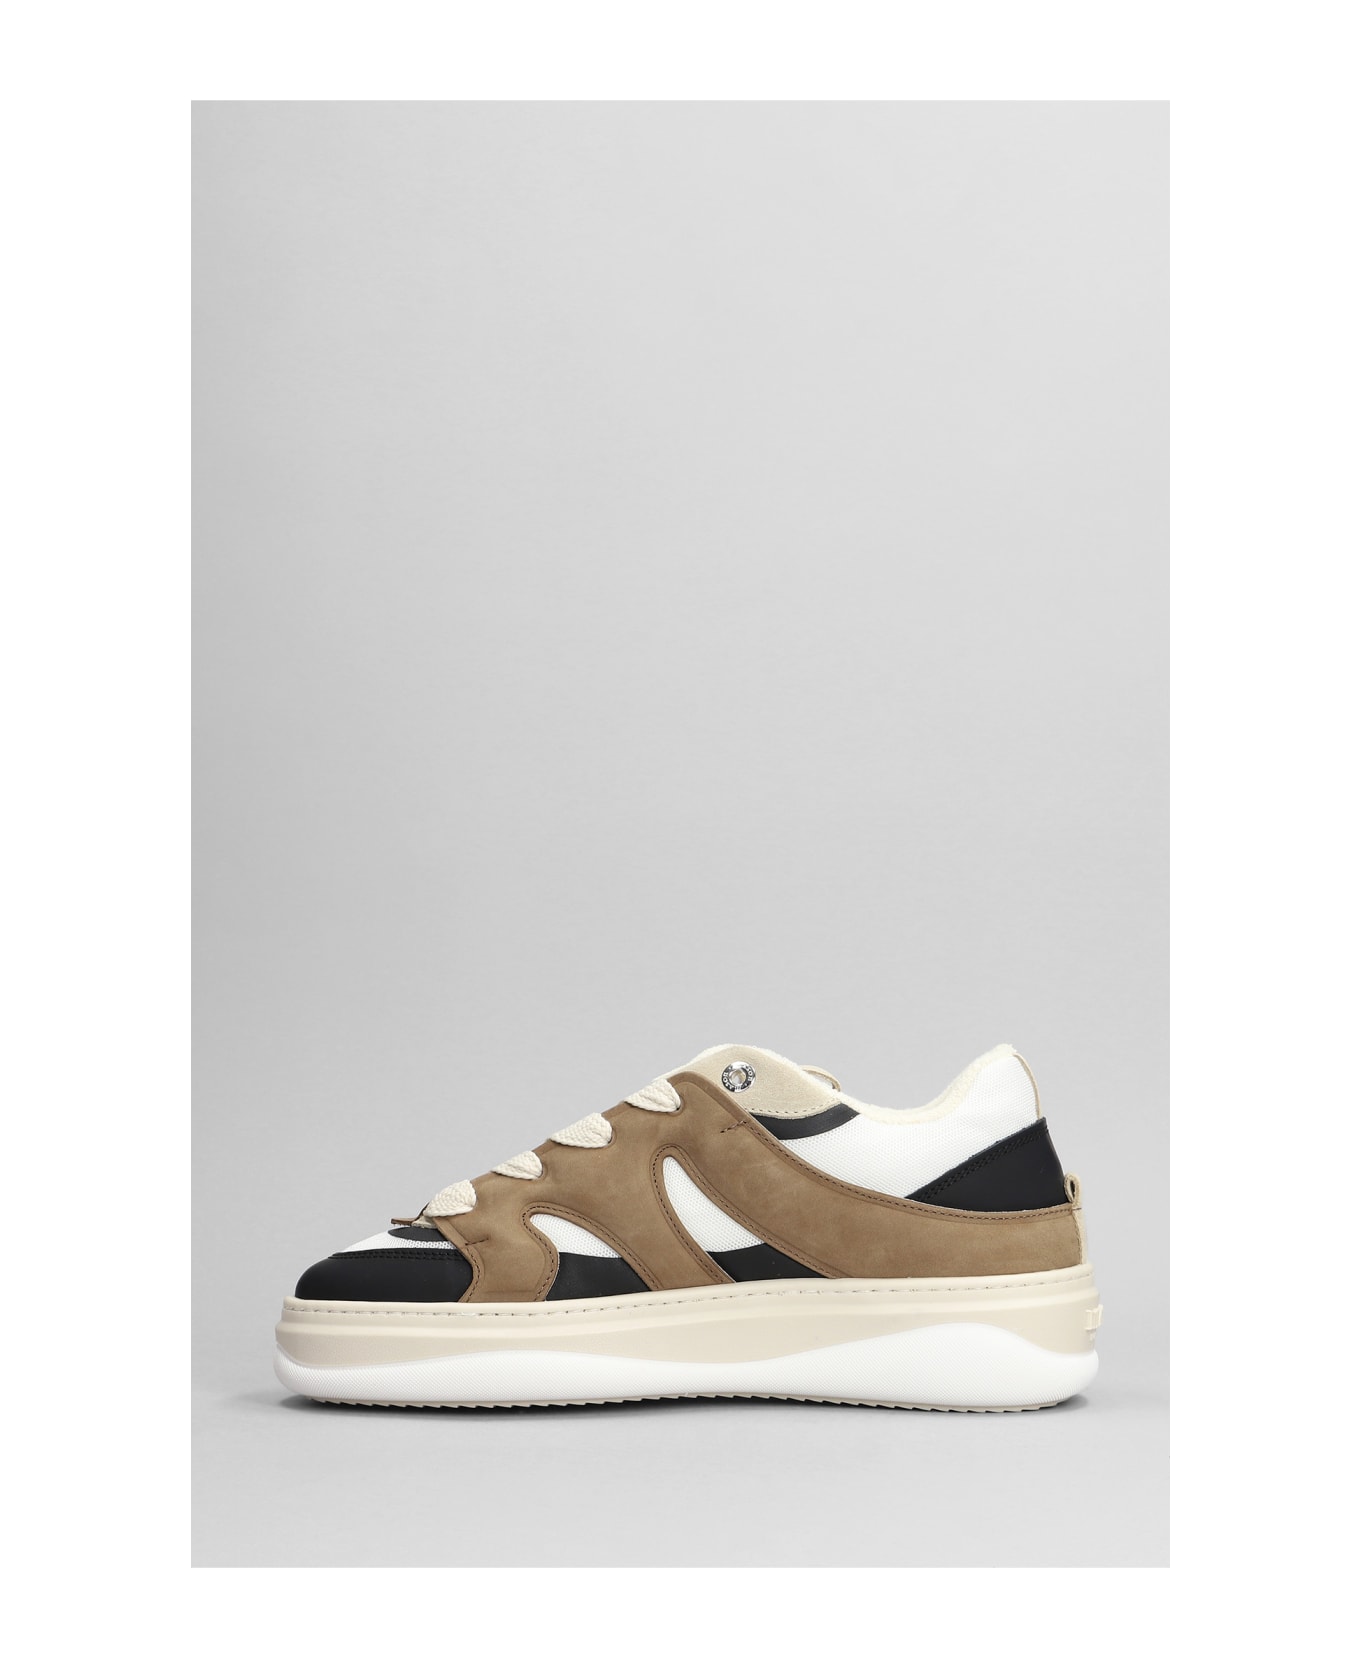 Mason Garments Venice Sneakers In Brown Suede And Fabric - brown